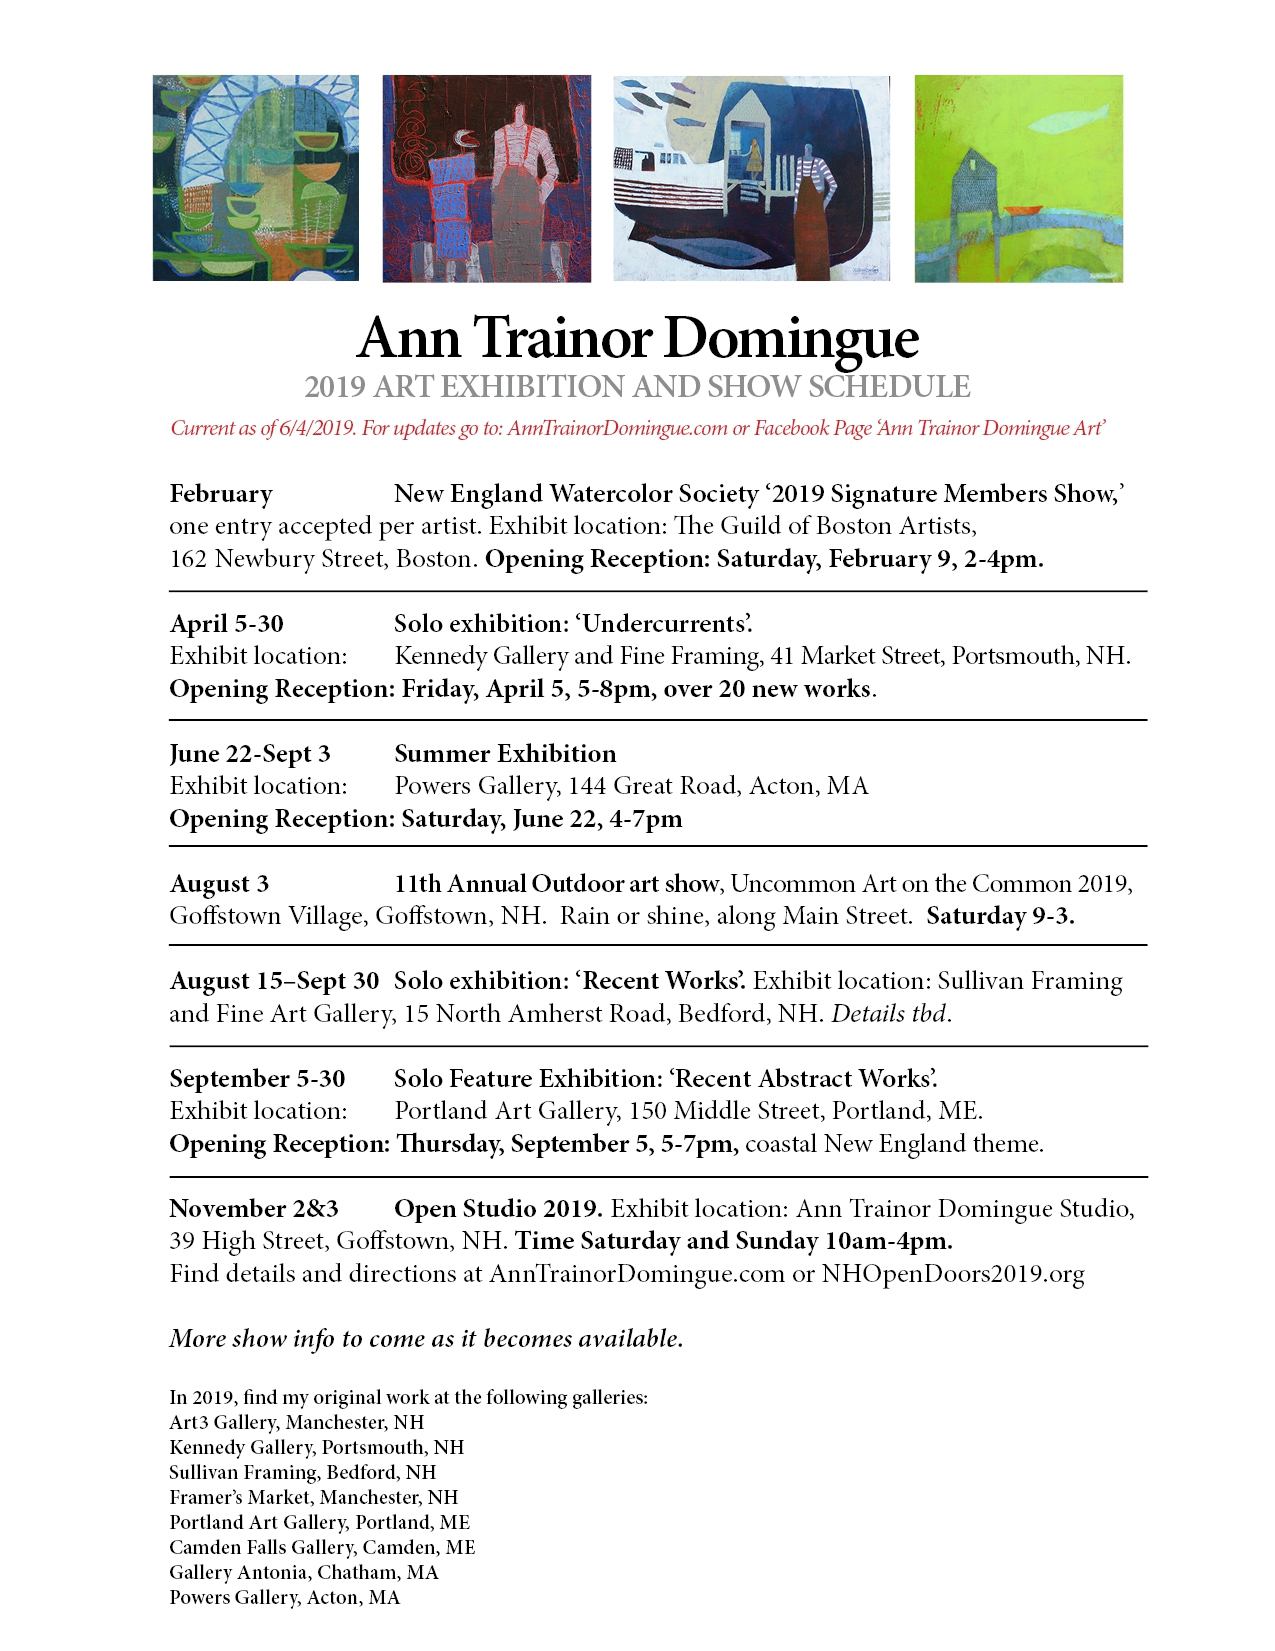 Click here to view 2019 Exhibition Schedule as of June 4 by Ann Trainor Domingue